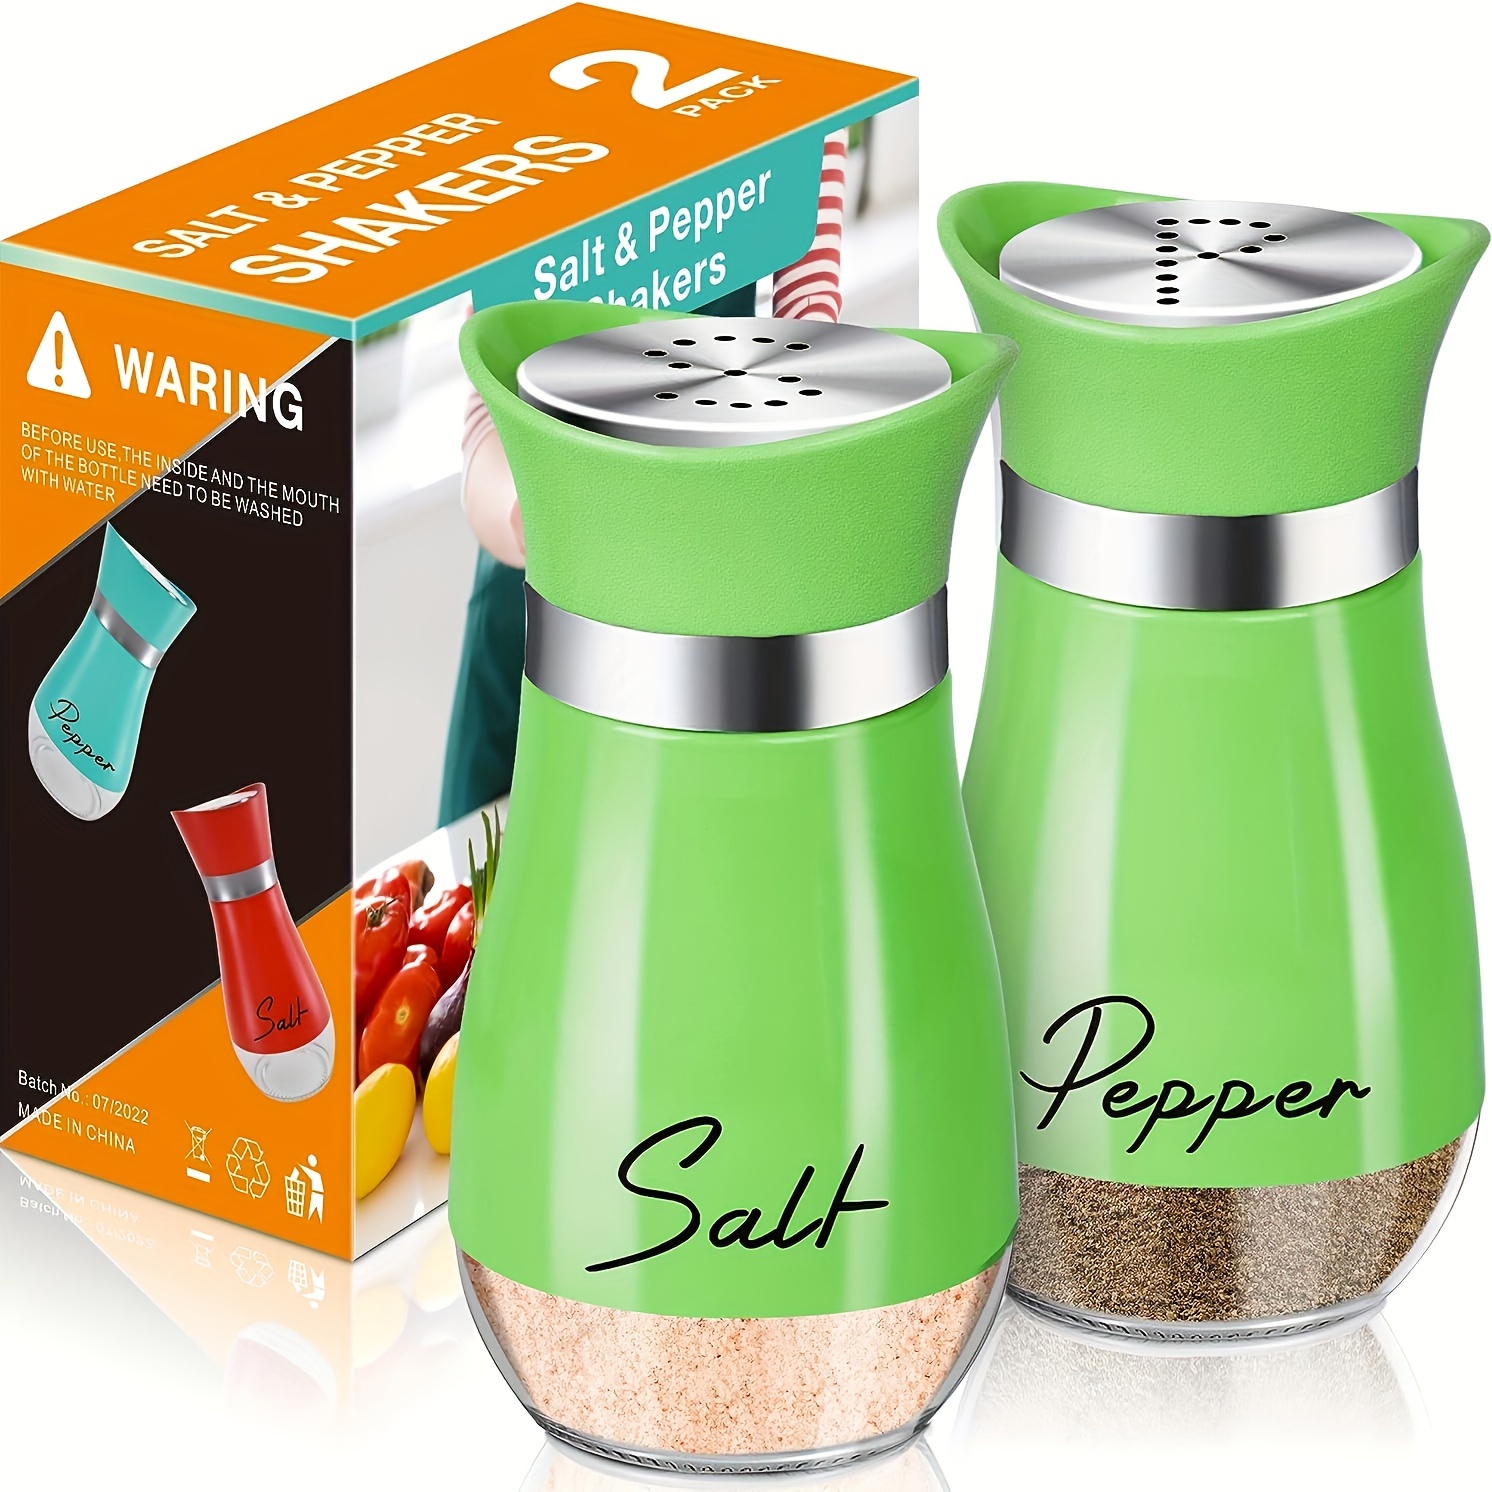 Teal Salt and Pepper Shakers with Glass Bottom, Stainless Steel